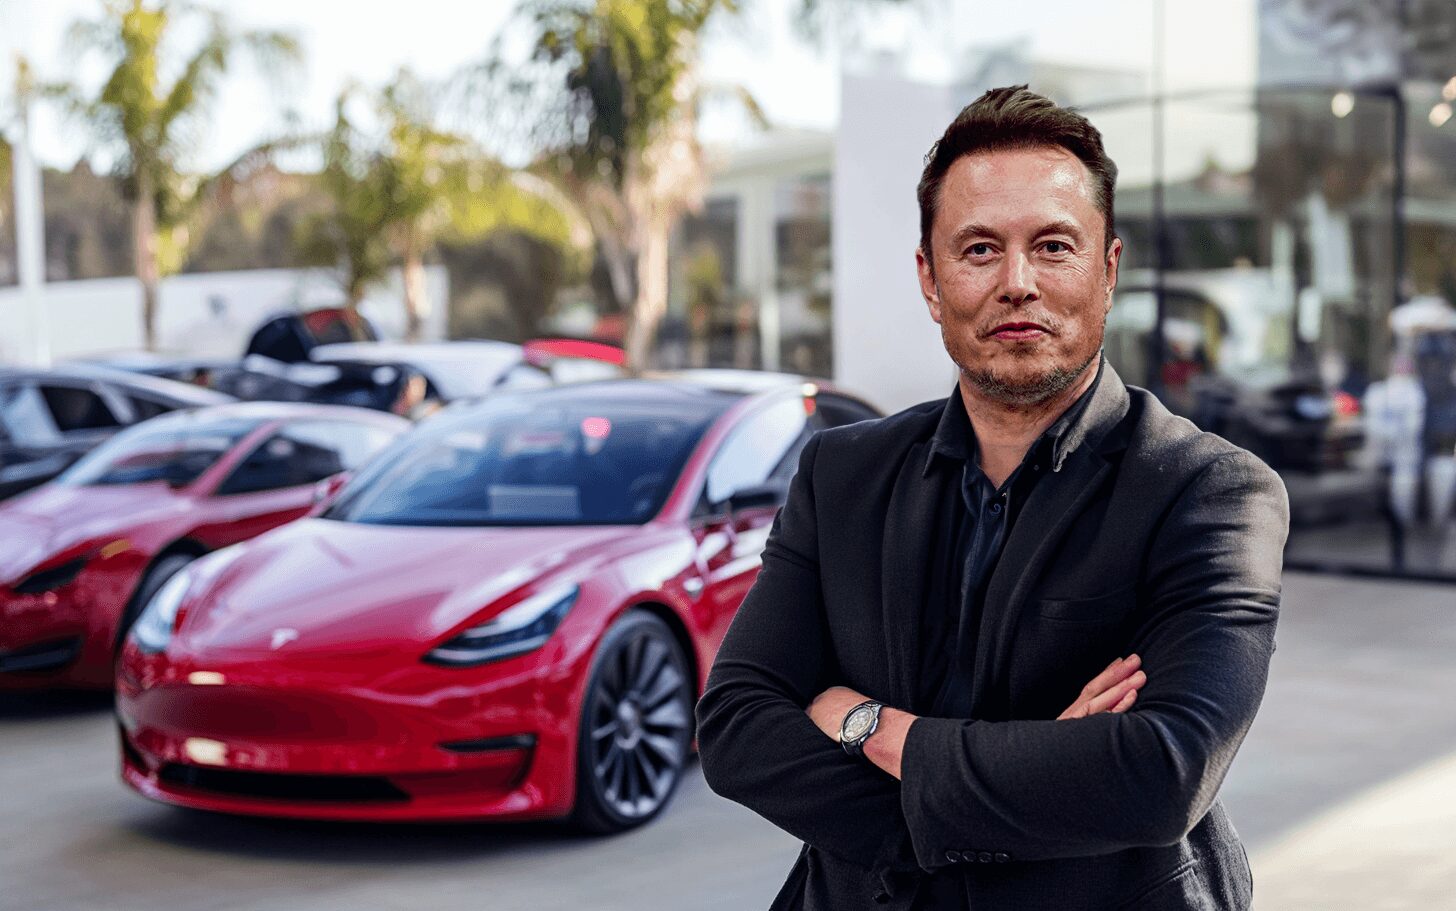 Elon Musk standing confidently with arms crossed in front of a row of red Tesla cars, showcasing part of his impressive car collection.